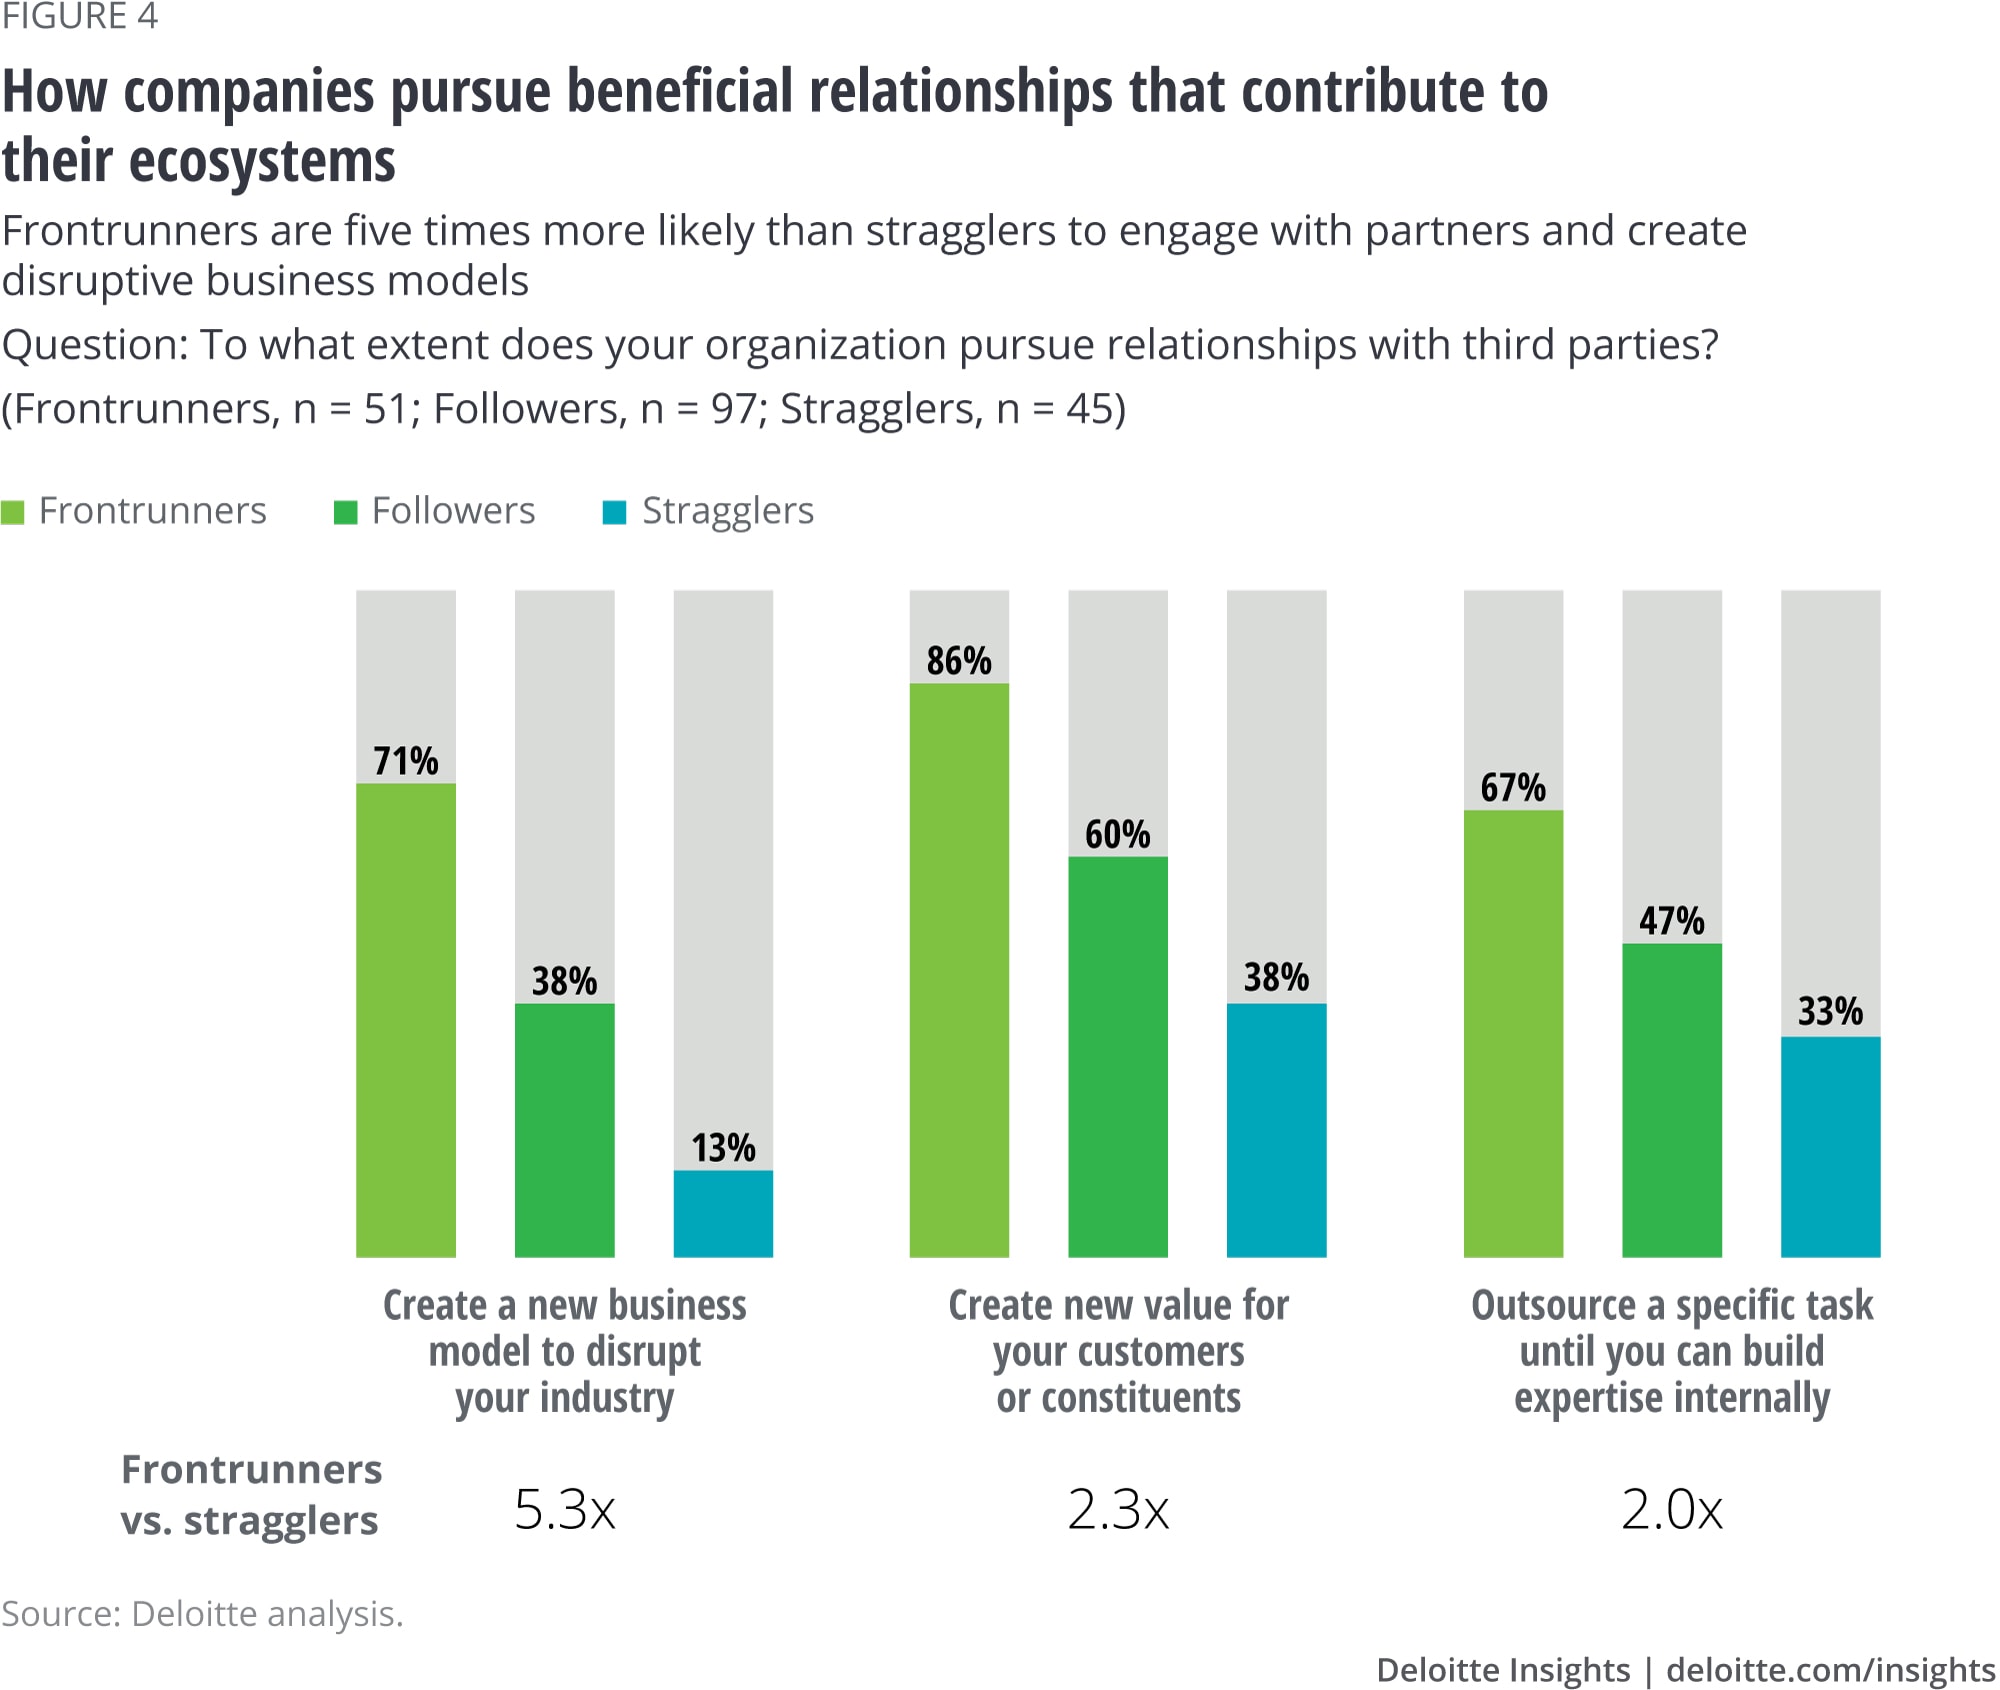 How companies pursue beneficial relationships that contribute to their ecosystems